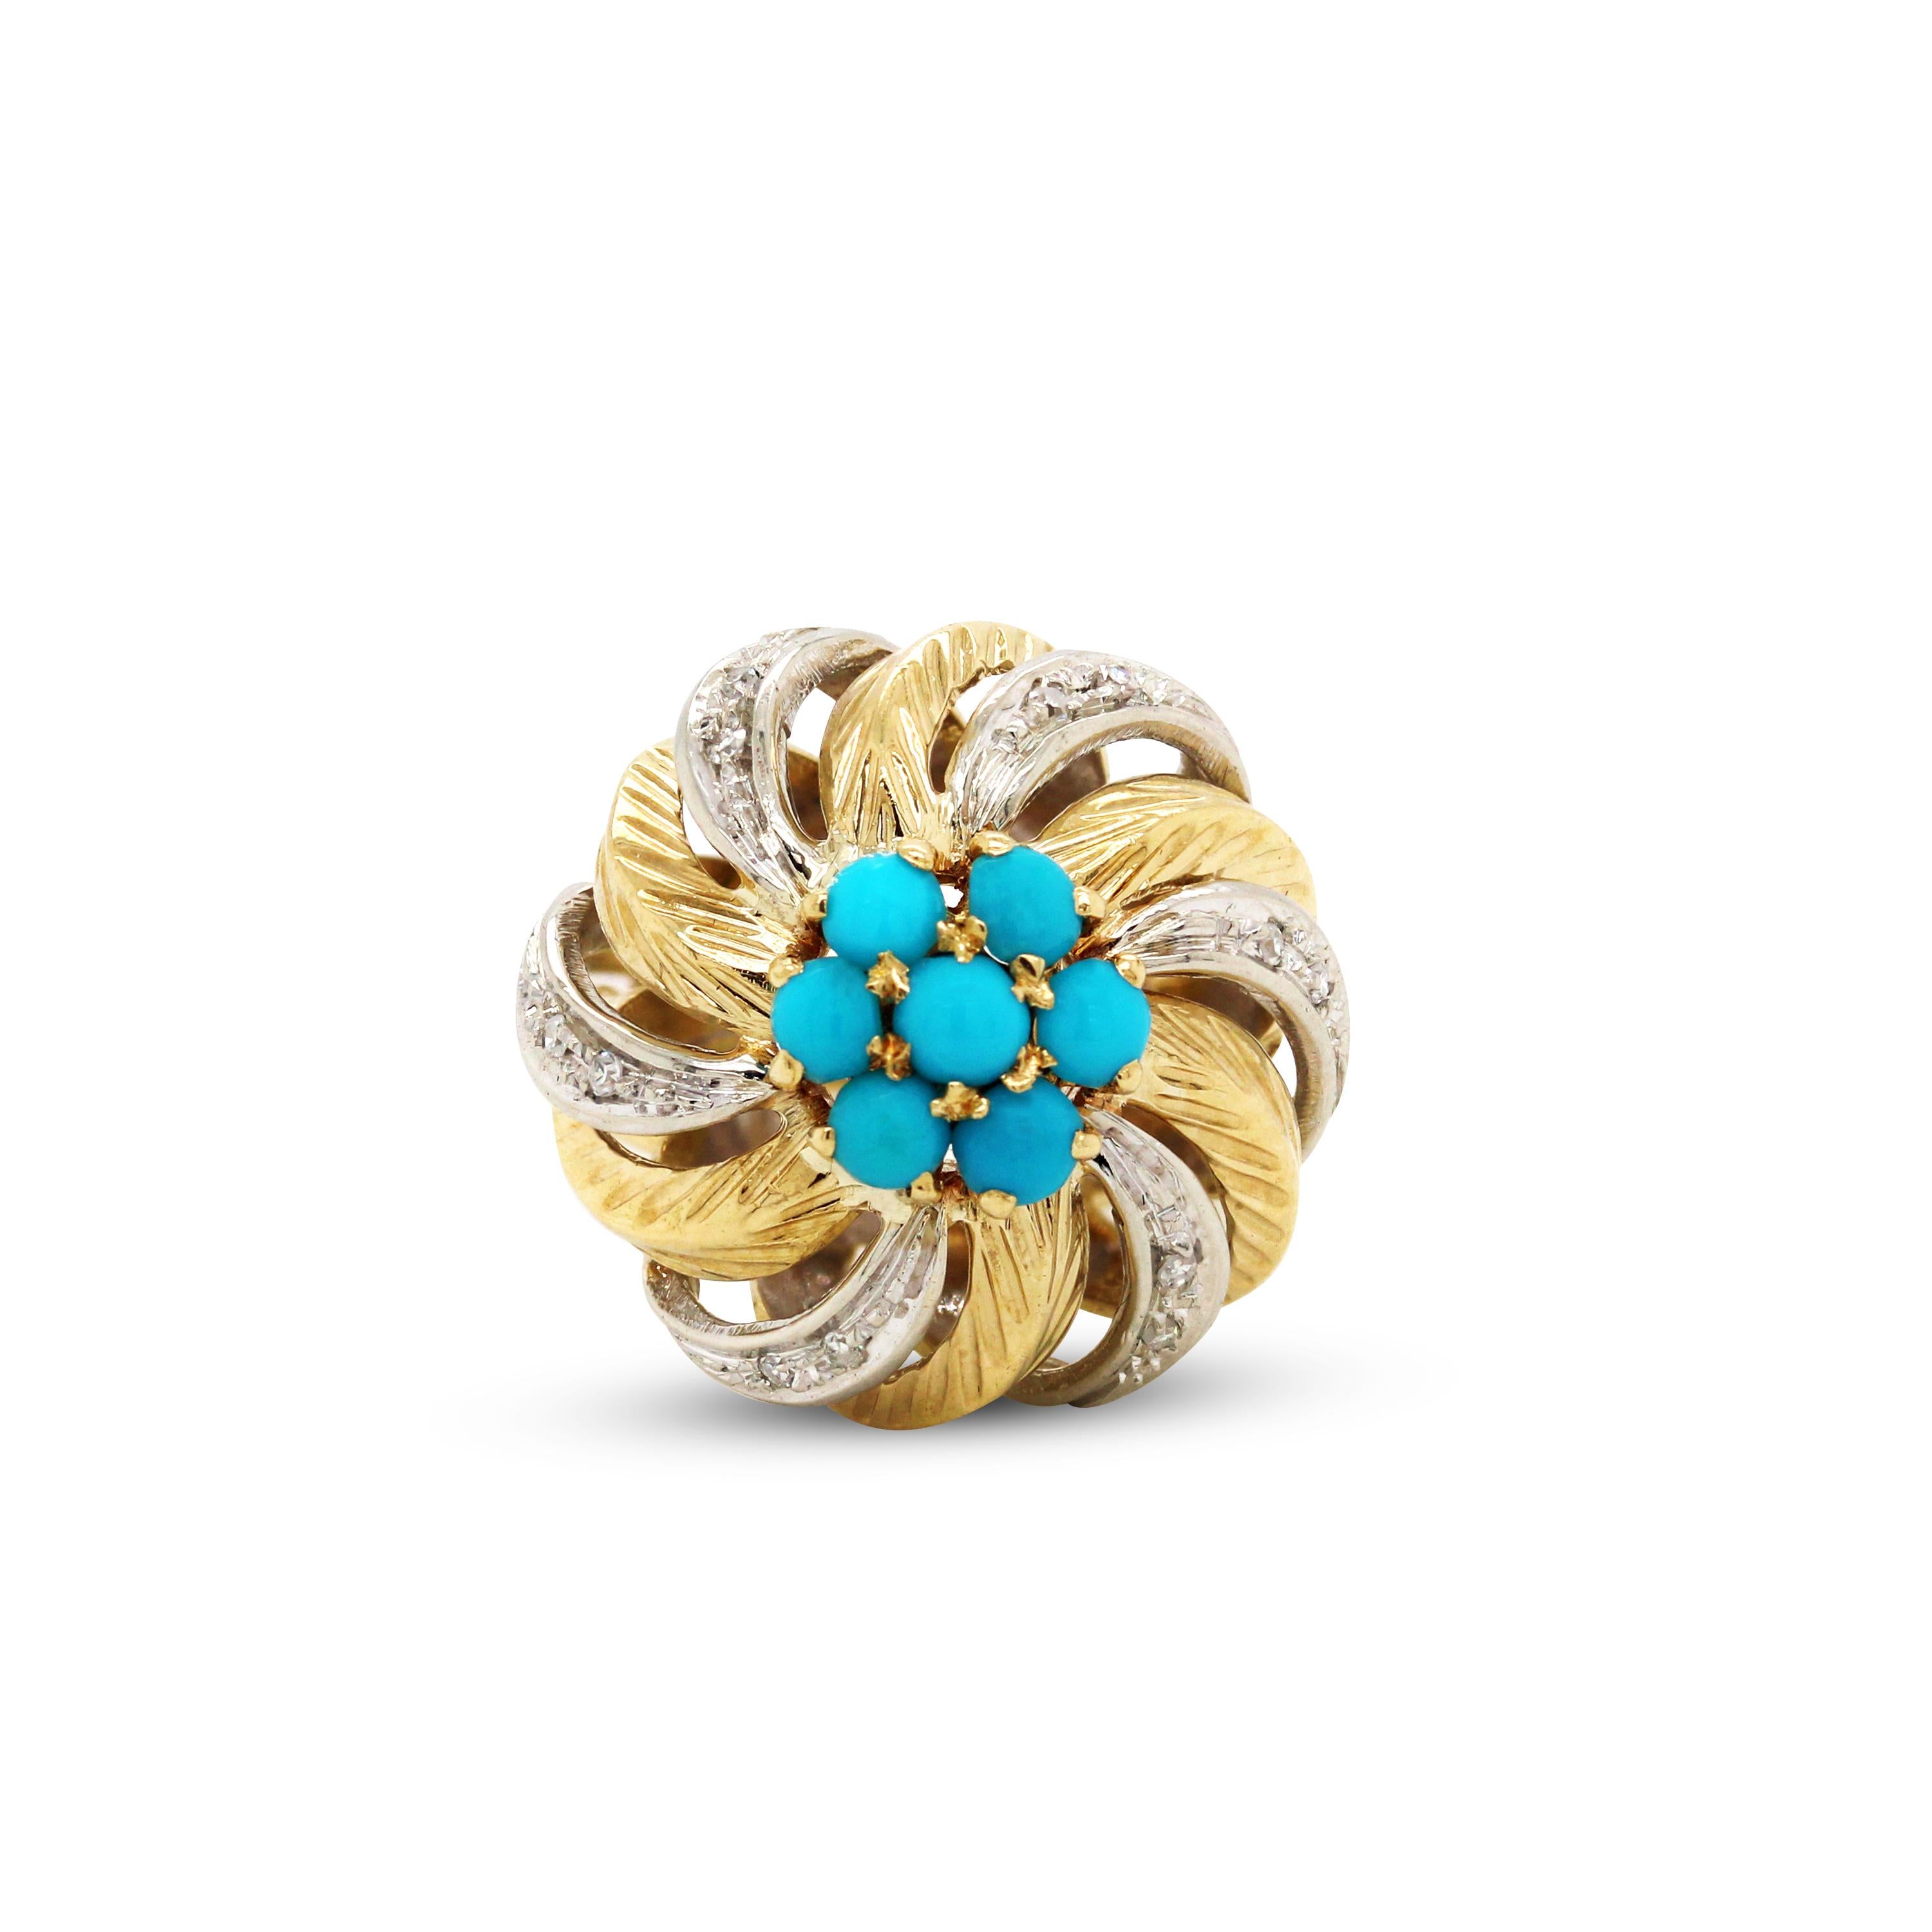 14K Yellow and White Two Tone Gold Ring with Diamonds and Turquoise in the Center

This beauty has a spiral-like design in the center alternating between yellow and white gold. The white gold sections feature diamonds.

The center of the ring has